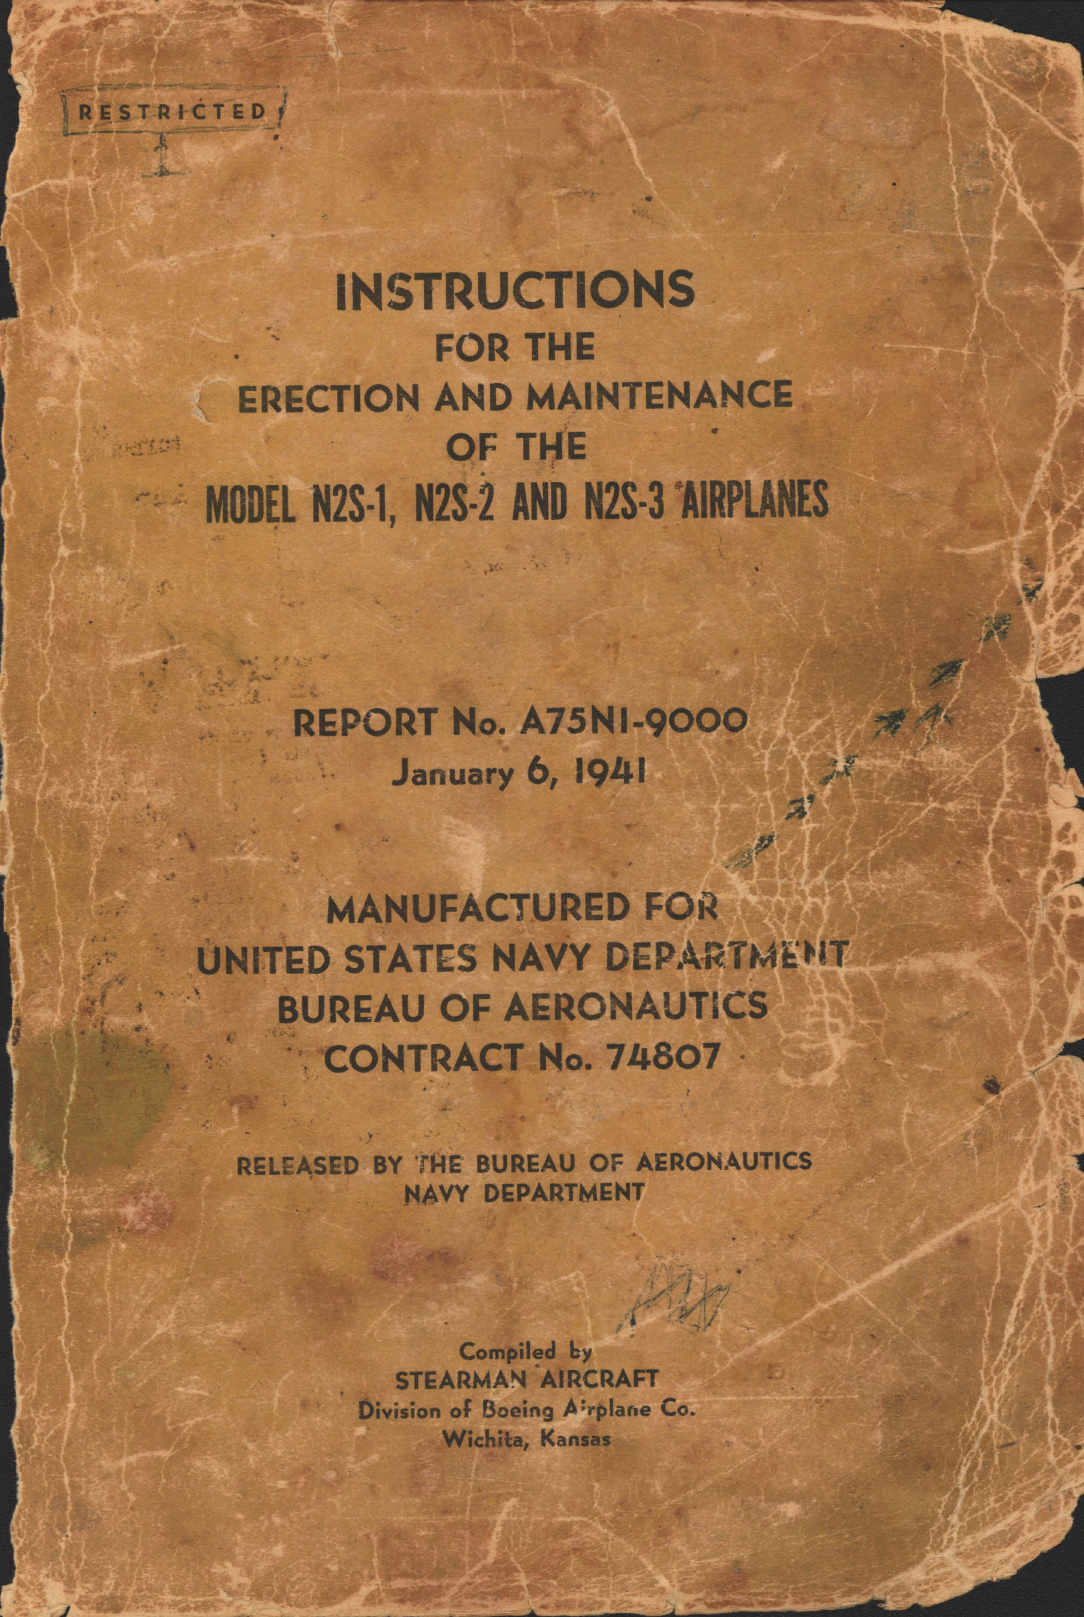 Sample page 1 from AirCorps Library document: Erection and Maintenance Instructions for N2S-1, -2, and -3